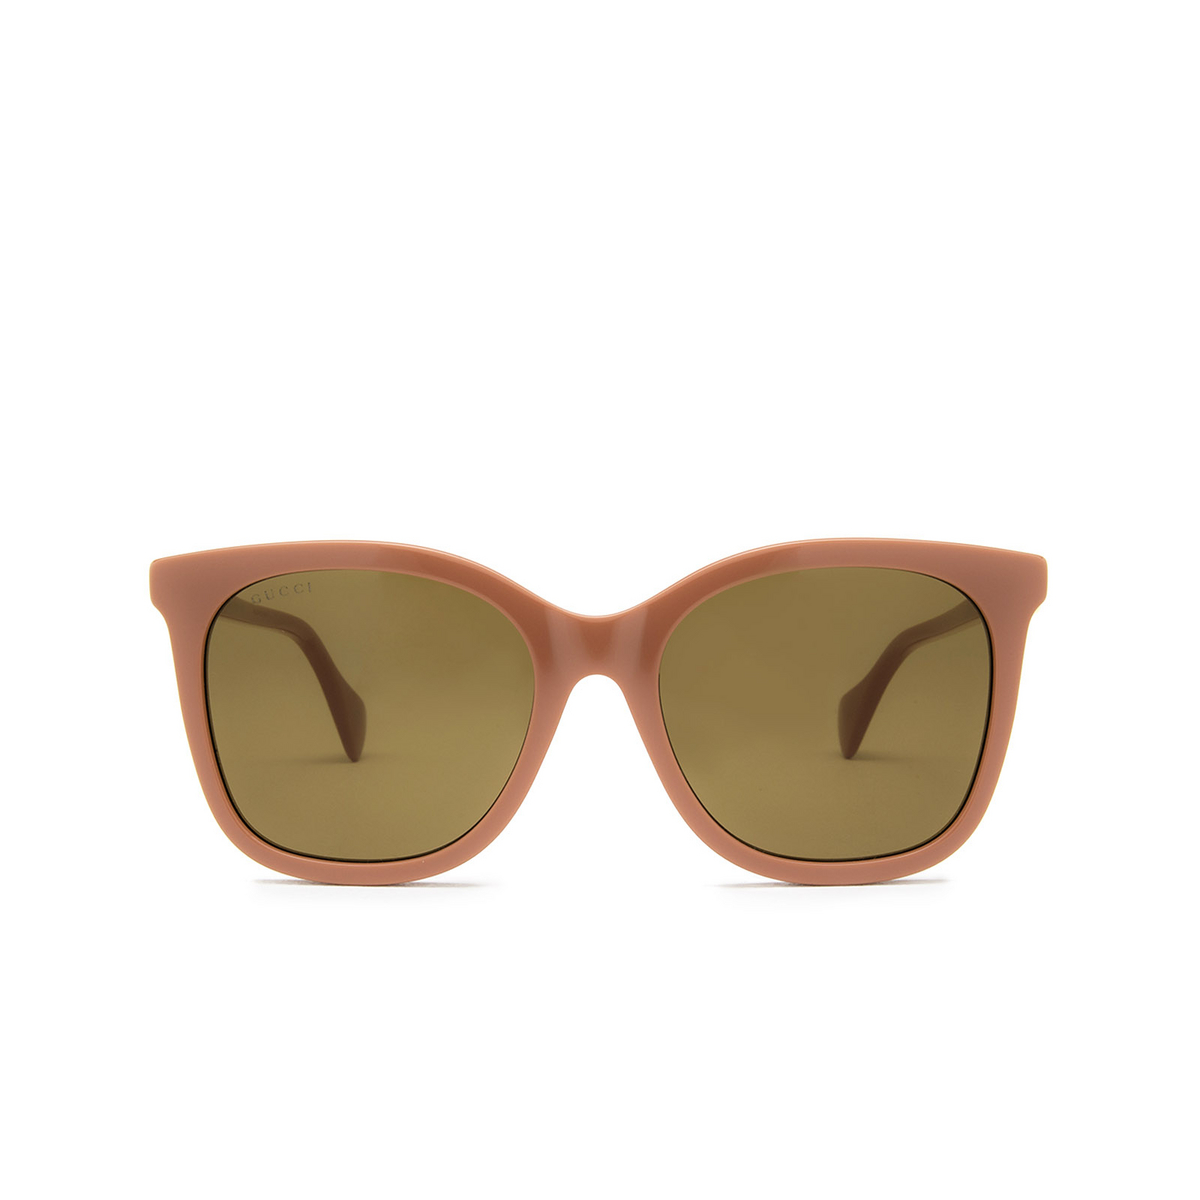 Gucci® Cat-eye Sunglasses: GG1071S color Pink 004 - front view.